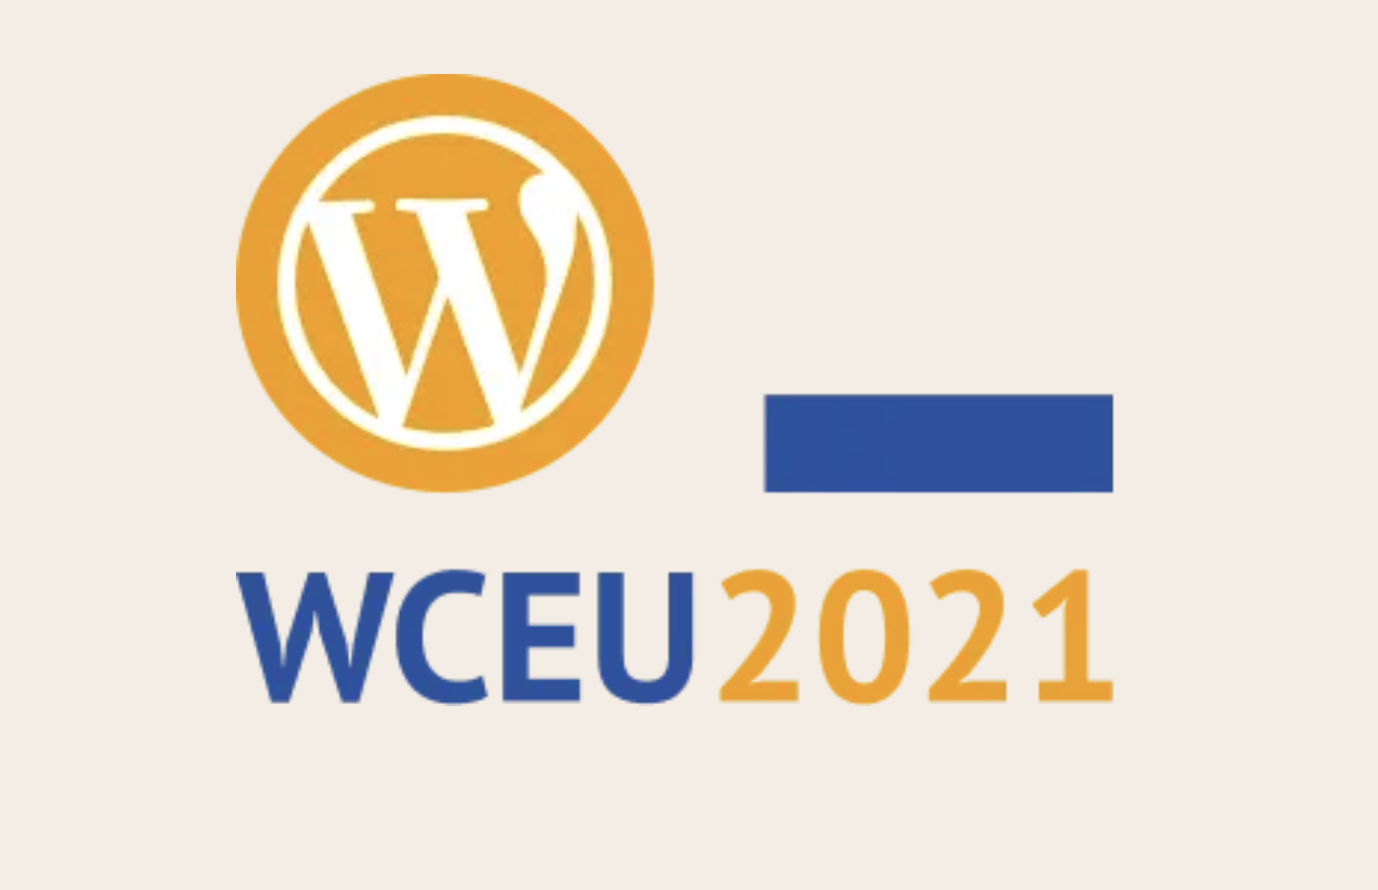 WordCamp Europe 2021 Opens Call for Speakers and Workshops